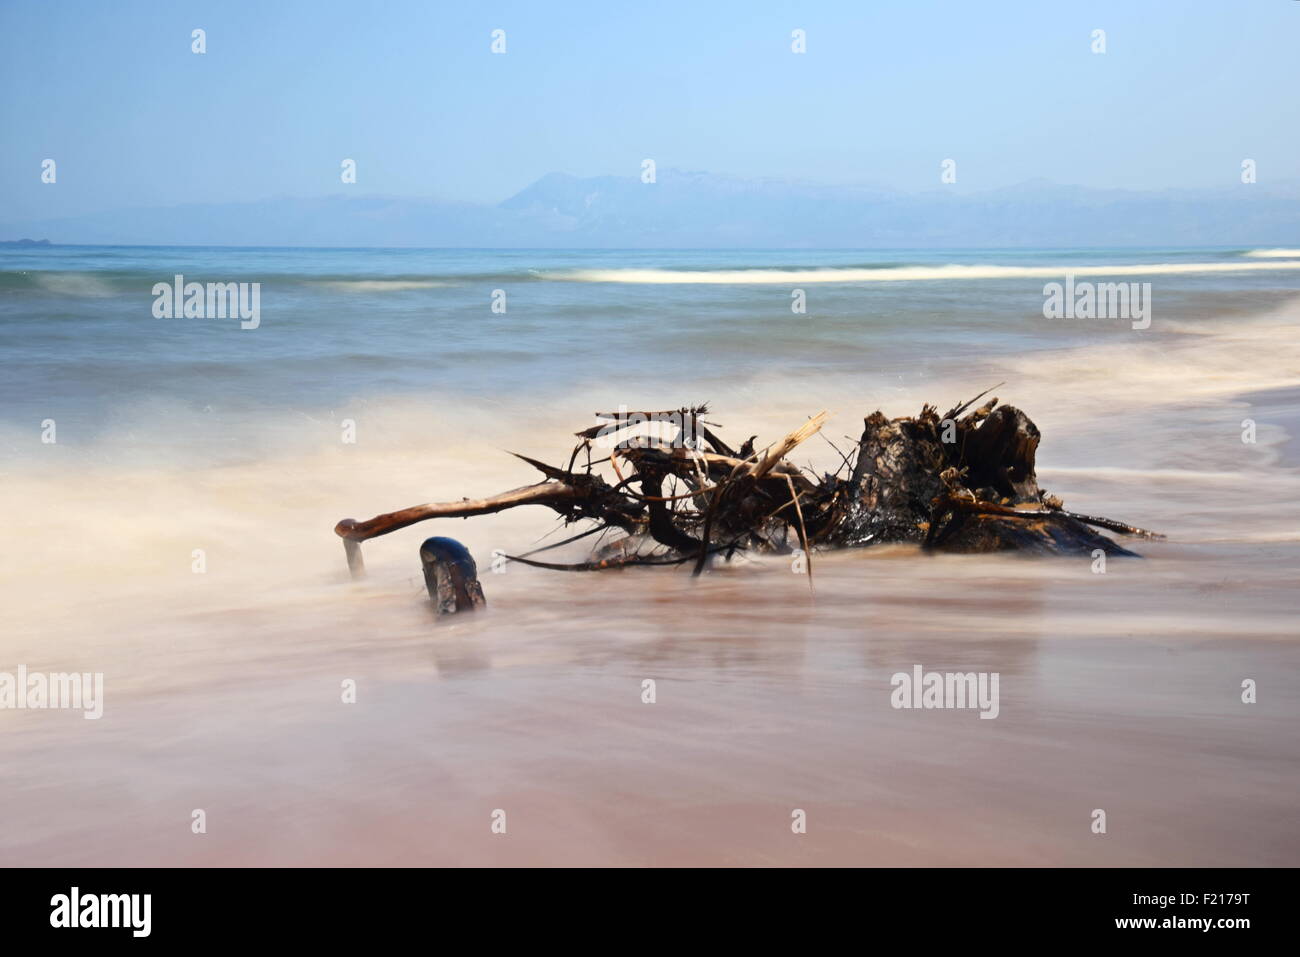 The monster from the Deep! - Driftwood on a beach with misty sea to add atmosphere. Stock Photo